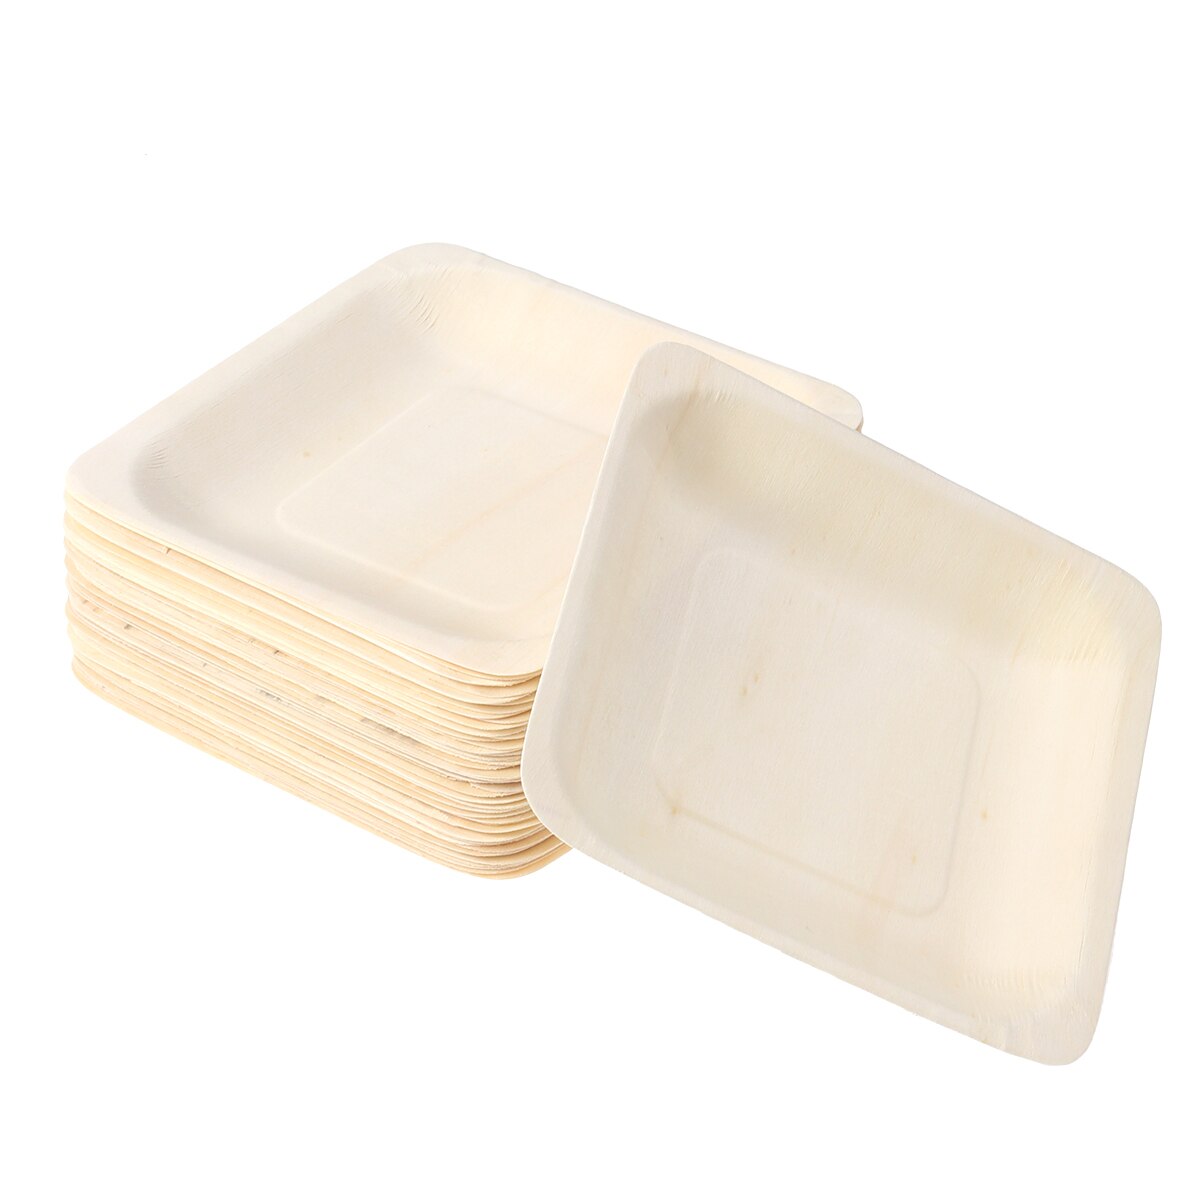 100pcs Disposable Wooden Square Plates Portable Tableware For Birthday Party Wedding Restaurant Picnic Barbecue